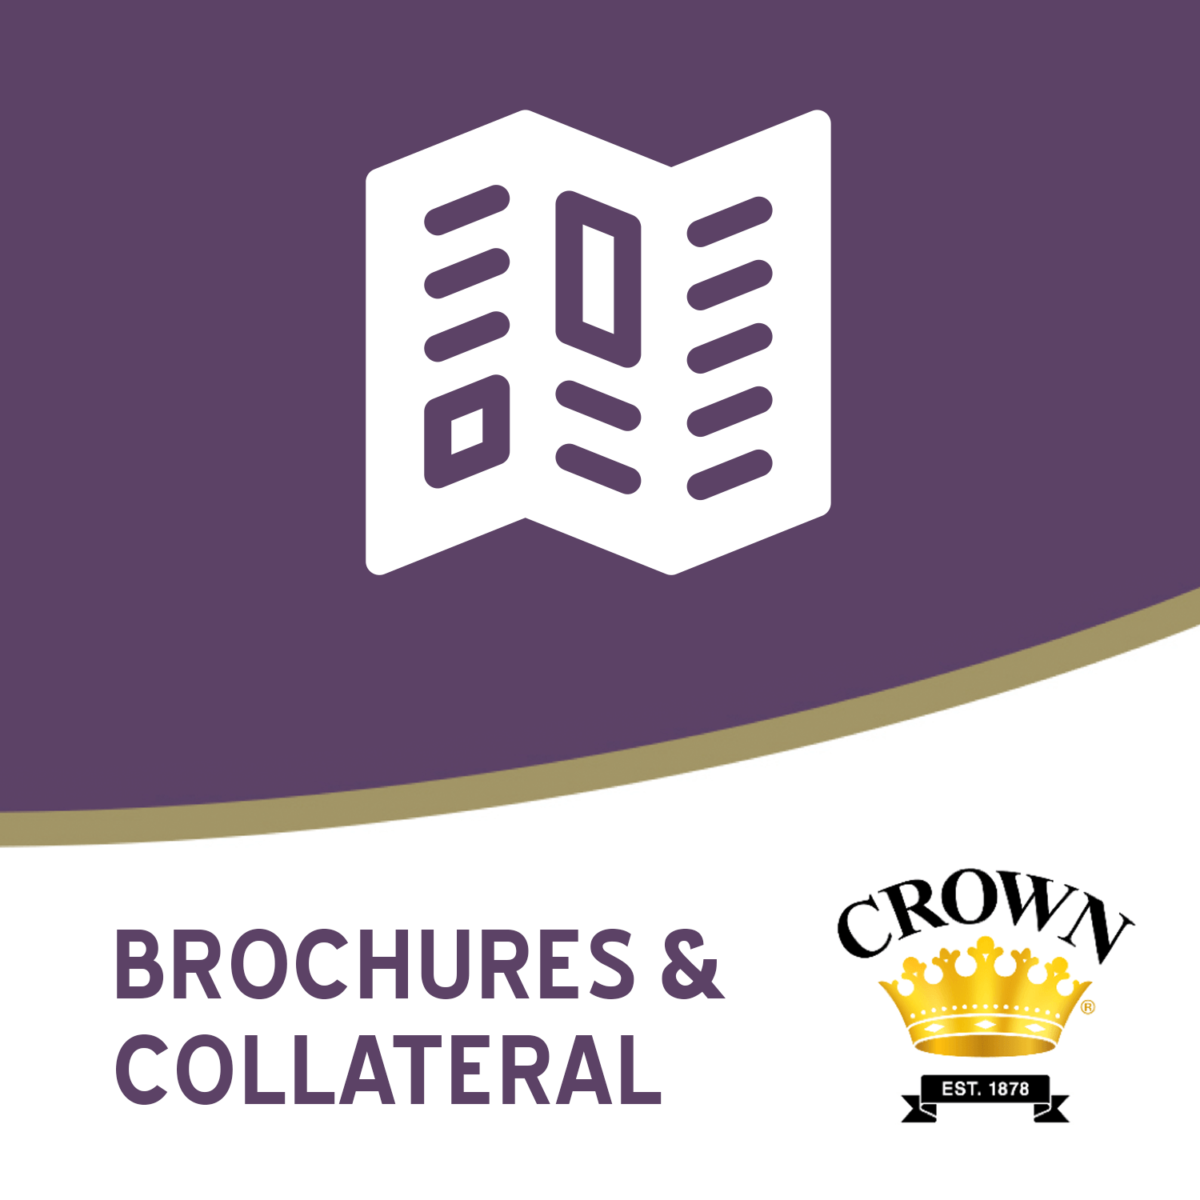 Brochures & Collateral